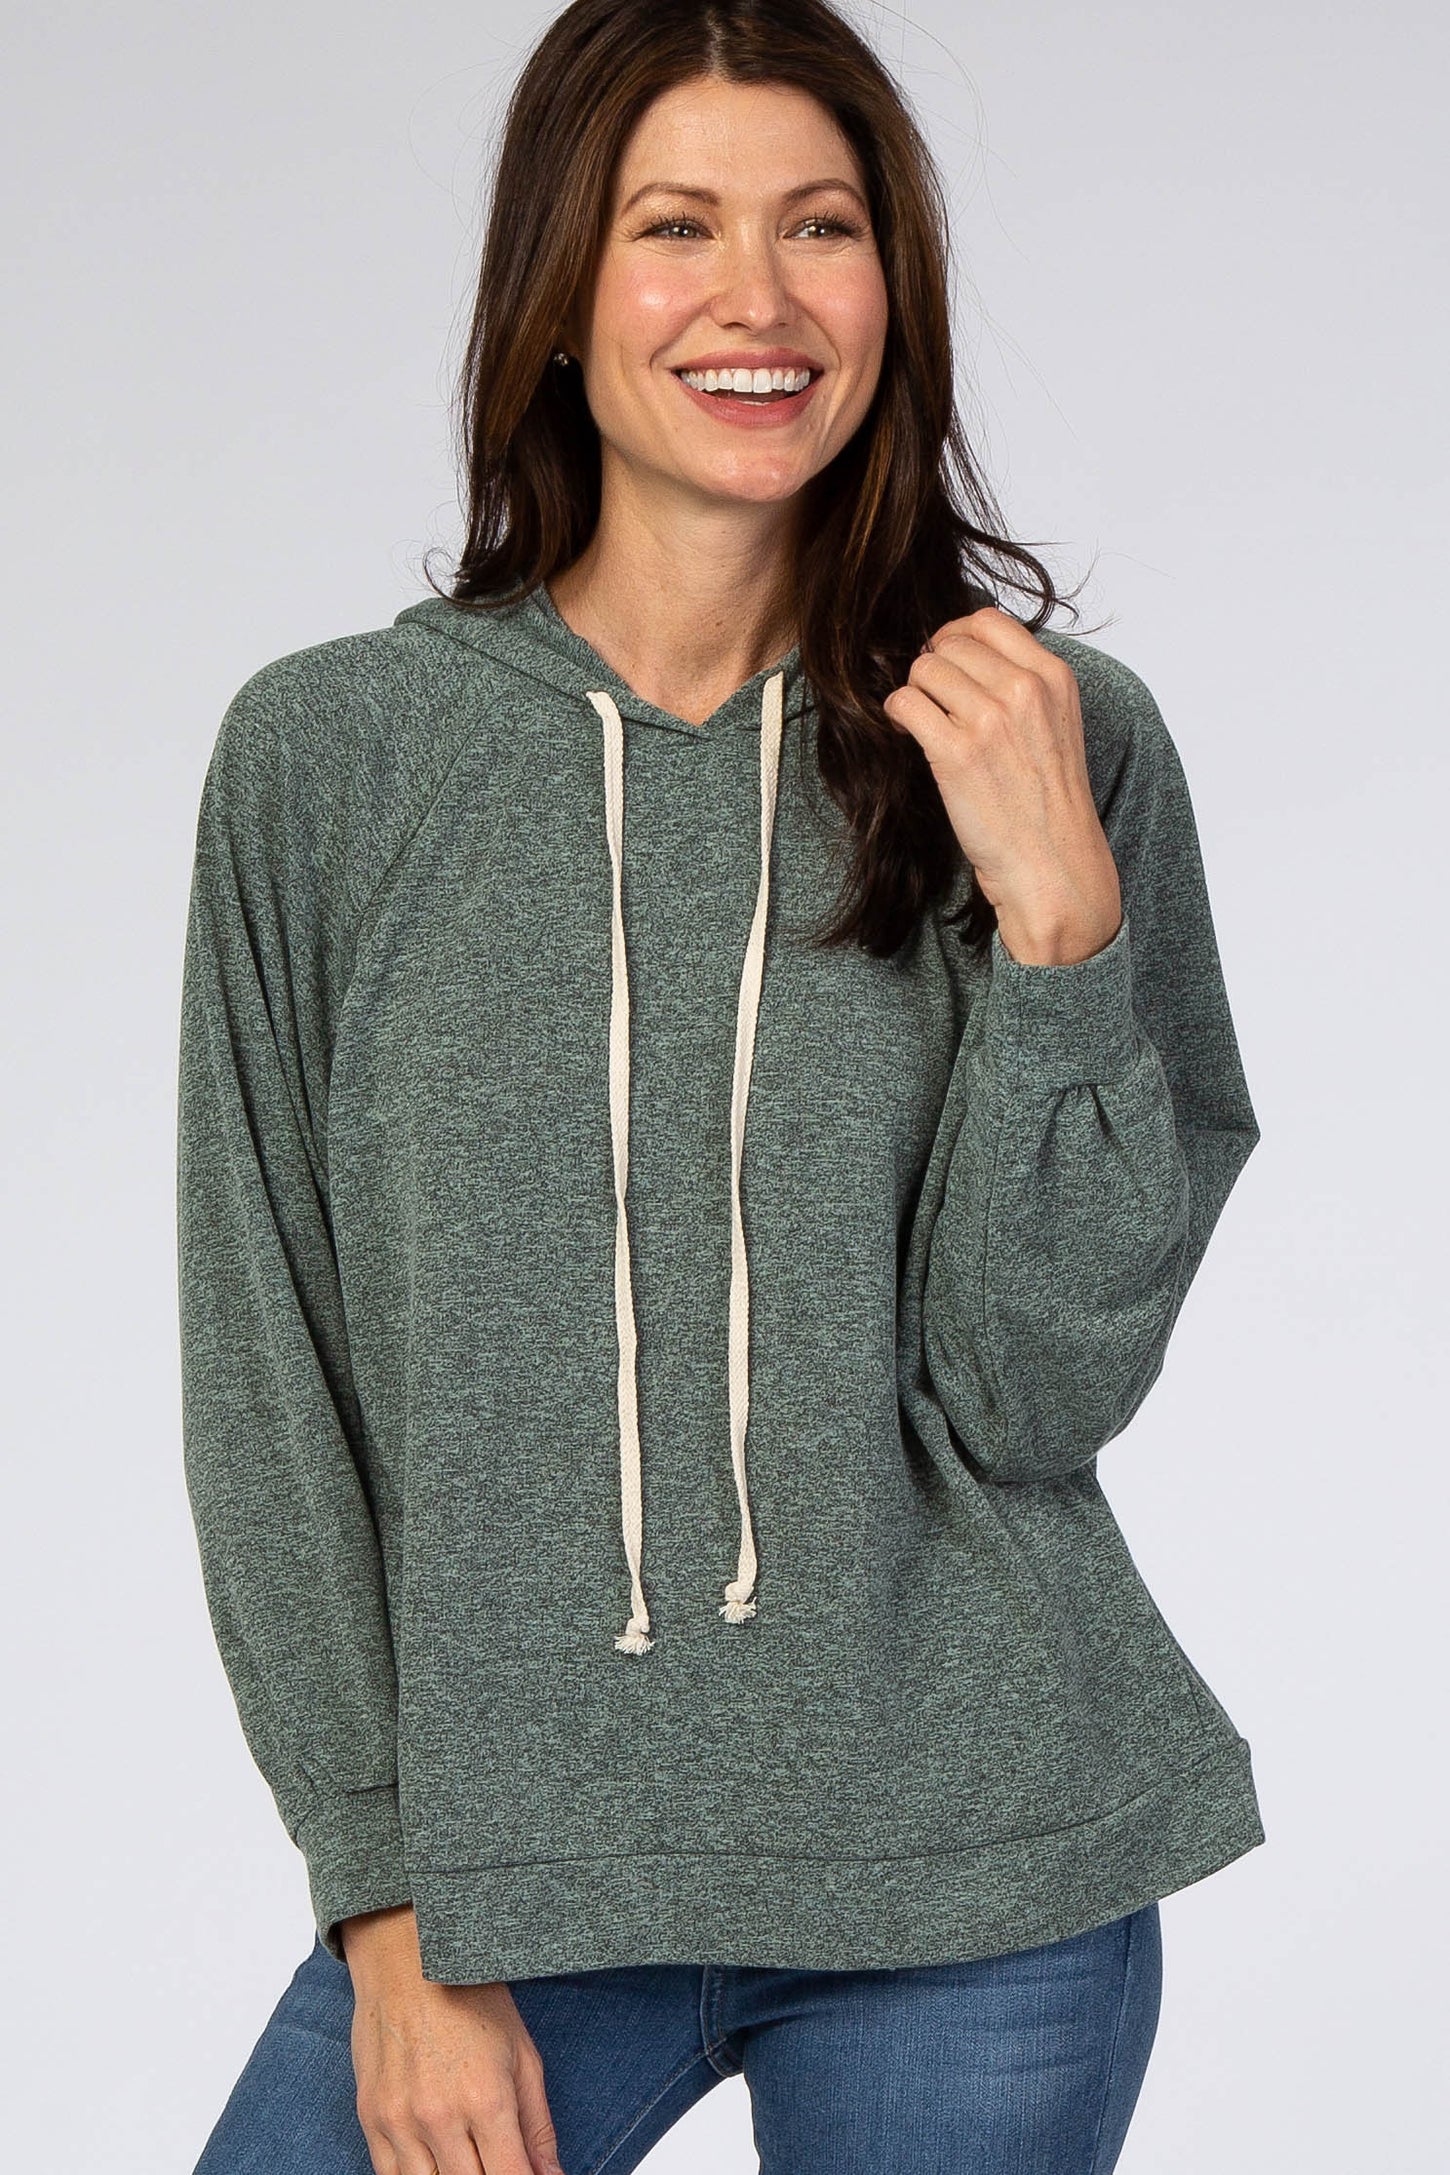 Green Heather Drawstring Hooded Top